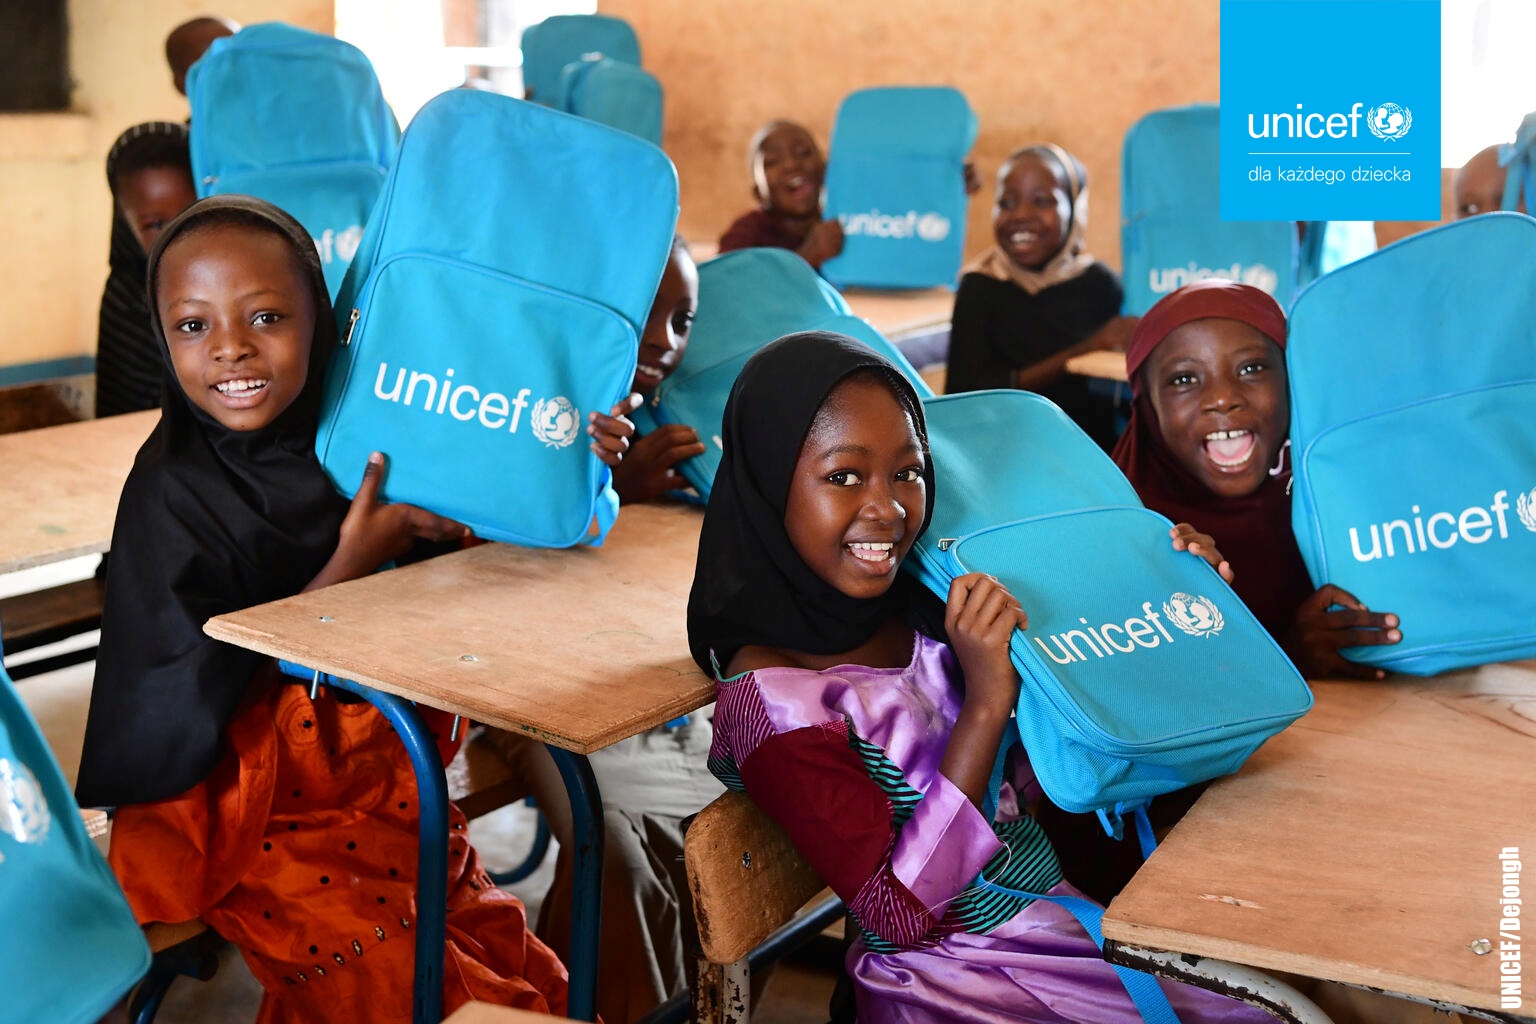 Children are very excited because they received UNICEF school backpacks at the Yantala school in Niamey, the capital of Niger.  The provision of school kits remains essential because they allow children from poor families and those from vulnerable areas to attend school with minimal supplies that their parents cannot afford. These school kits constitute an important element of equity, especially for poor families.  We are facing a global education crisis due to COVID-19. Schools for 168 million students have been closed for almost a year due to the pandemic. These children can’t go another day out of the classroom.  For every child education.